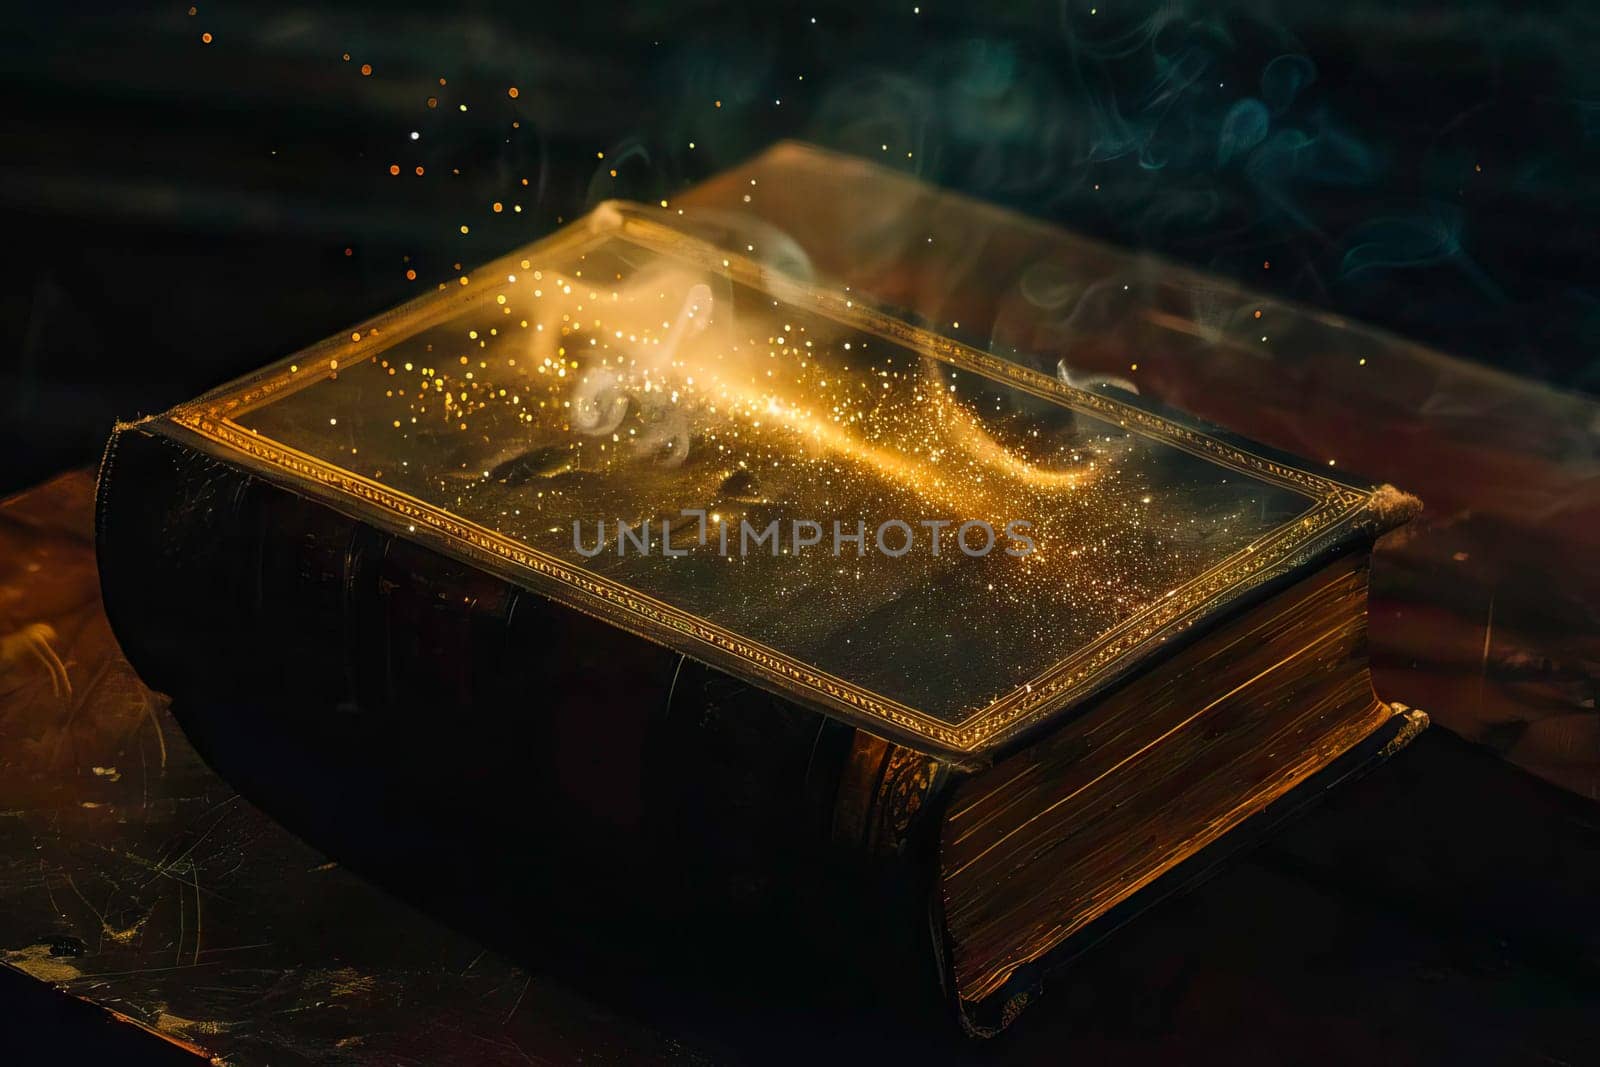 A book with a golden dust shimmering inside, resembling a sacred glow. by vladimka